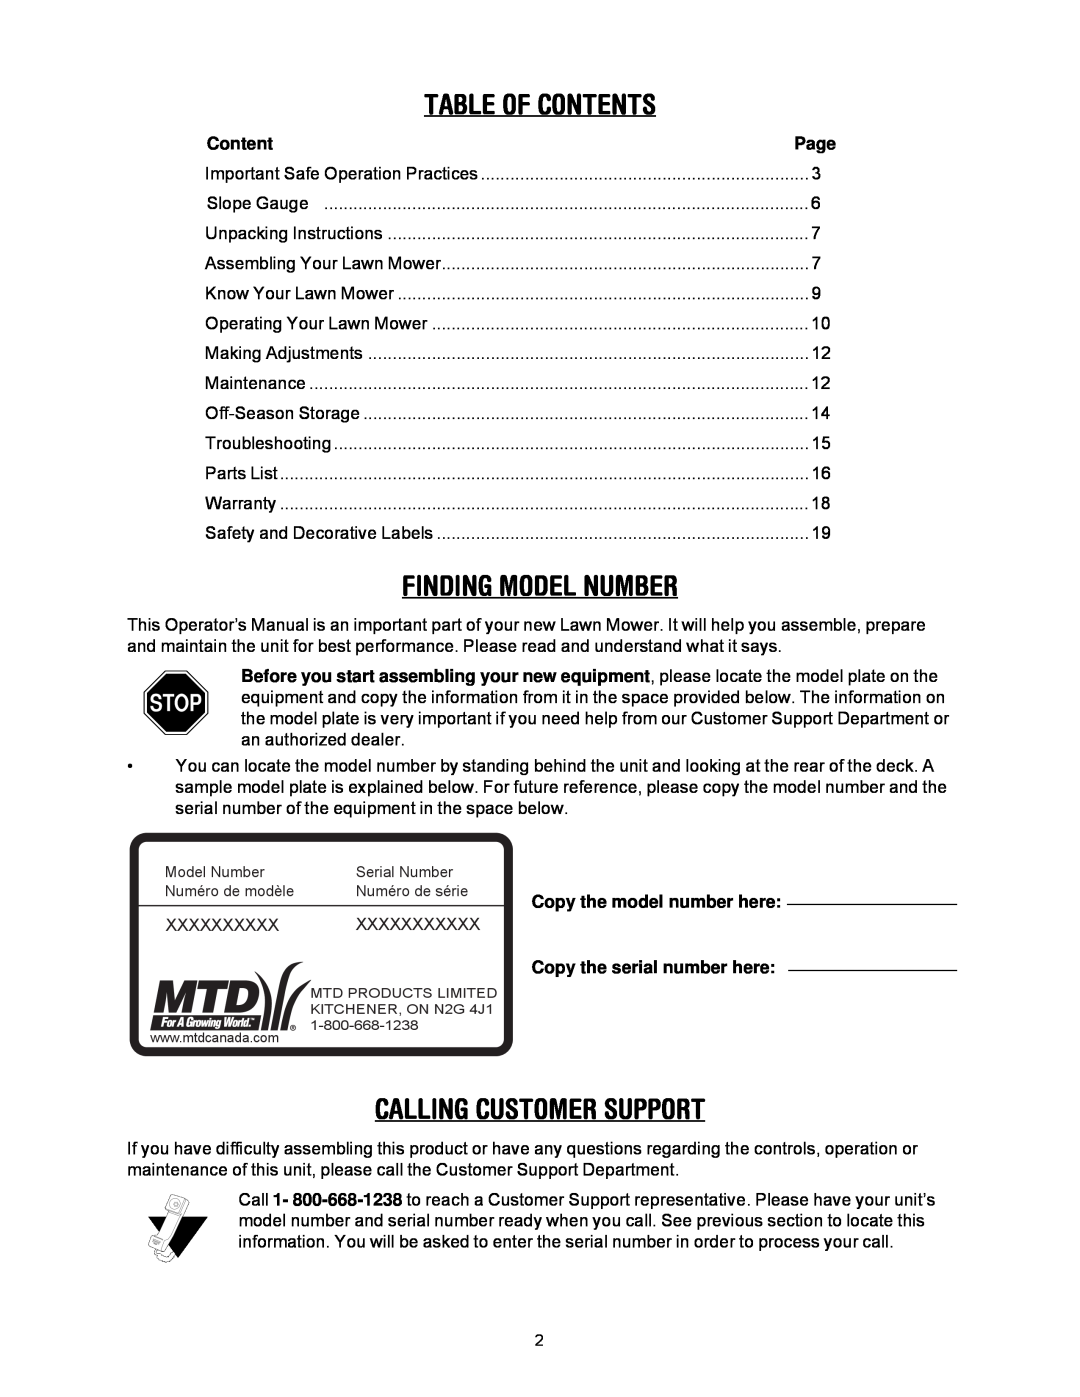 MTD 769-01445 manual Table Of Contents, Finding Model Number, Calling Customer Support, Xxxxxxxxxxx 